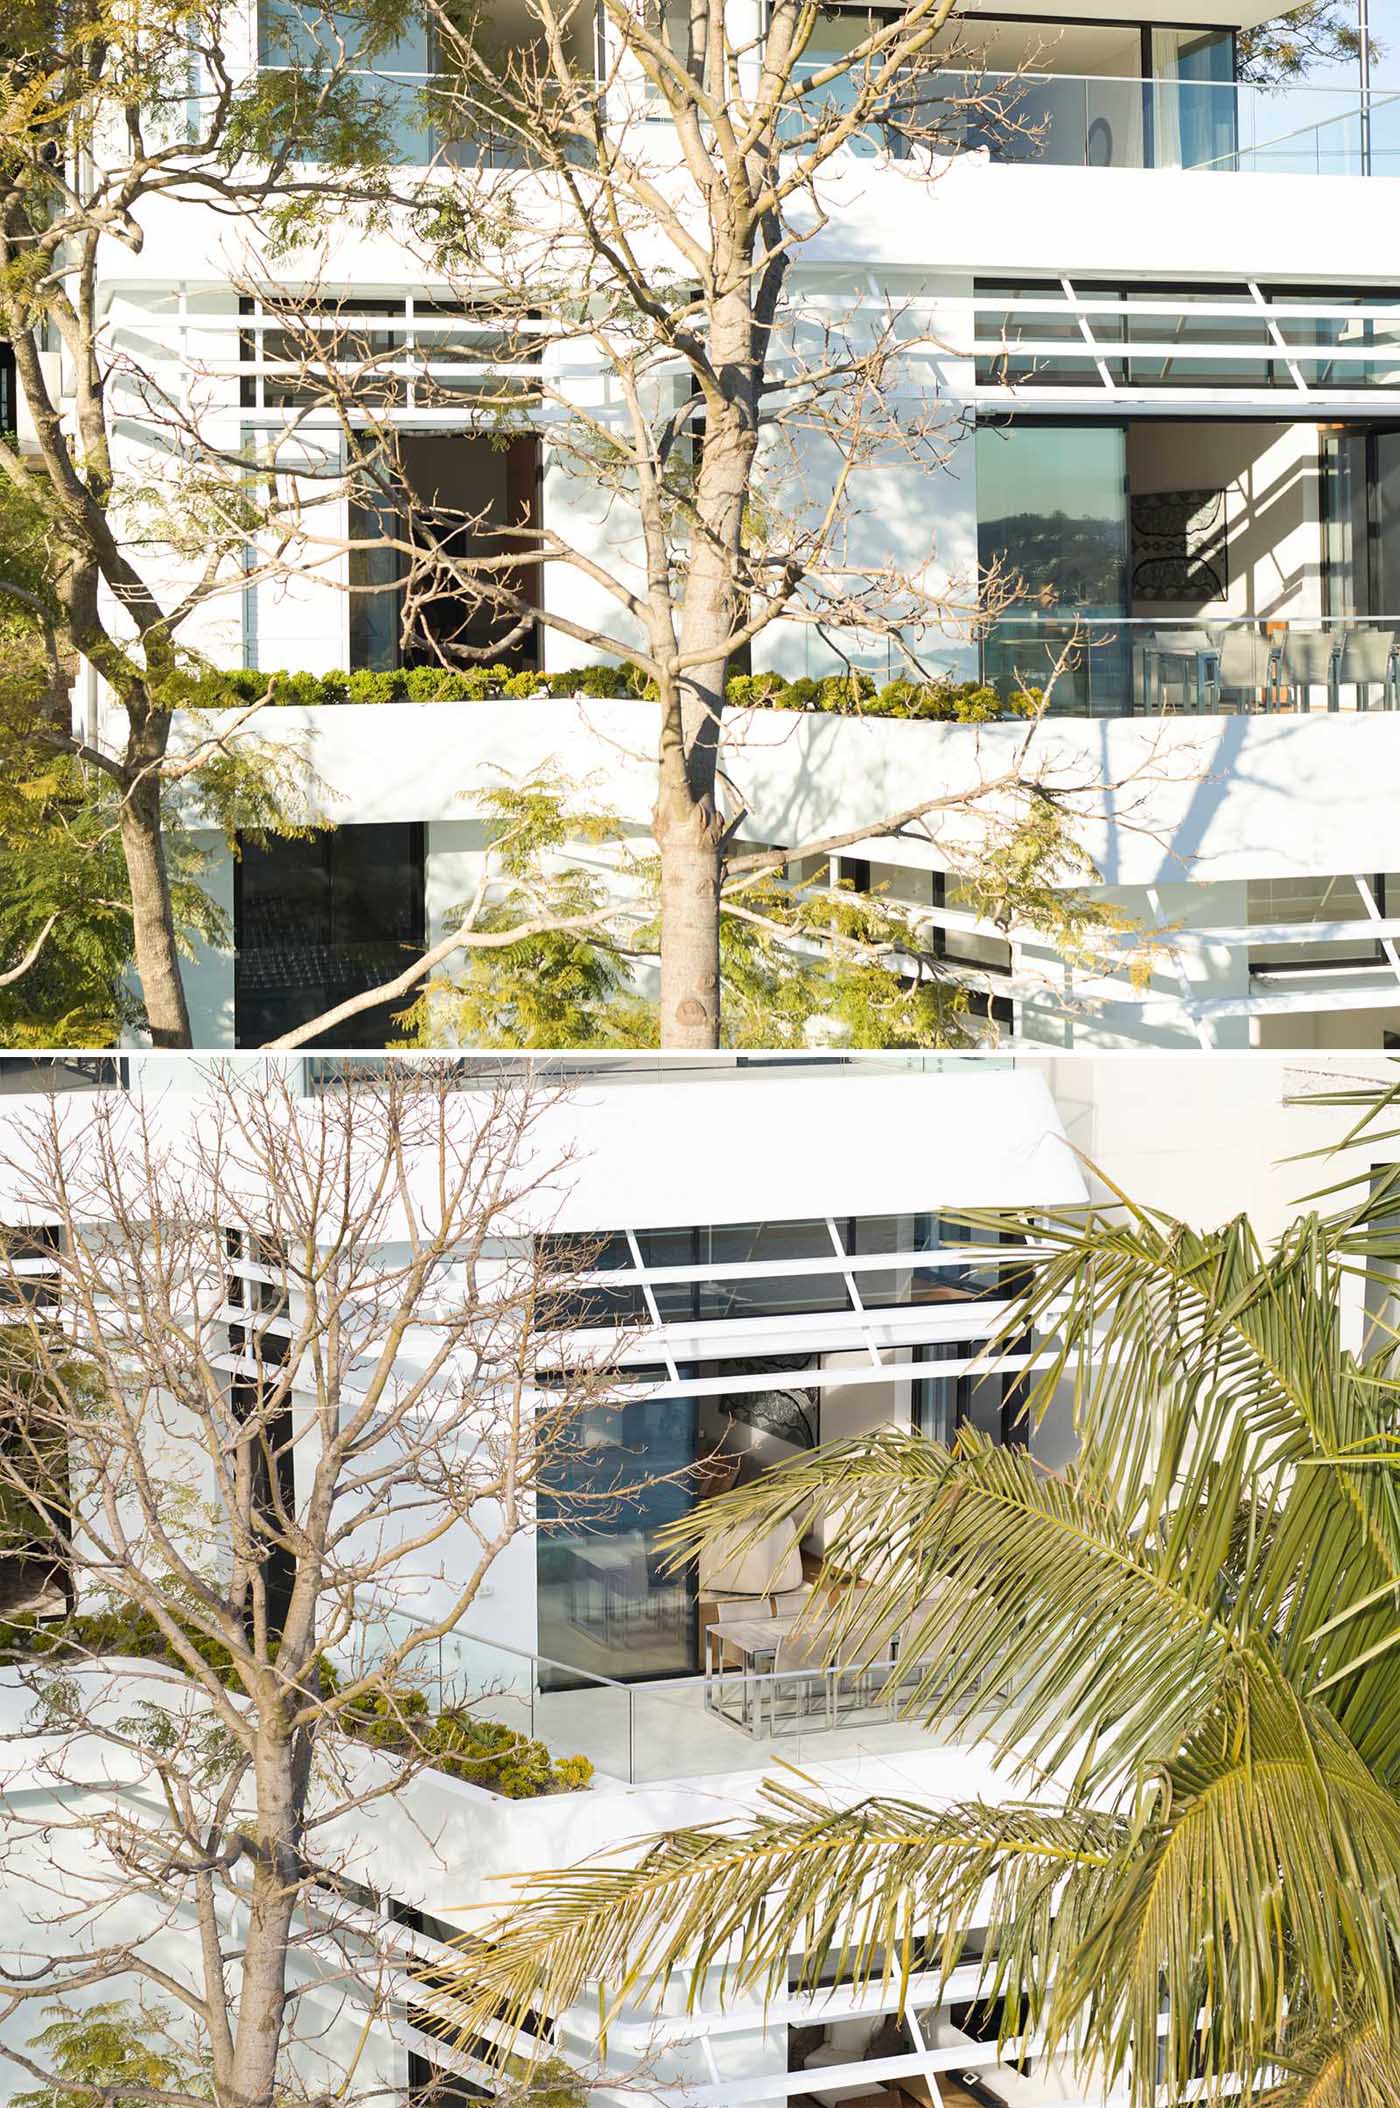 White balconies of this modern home are softened by vegetation.